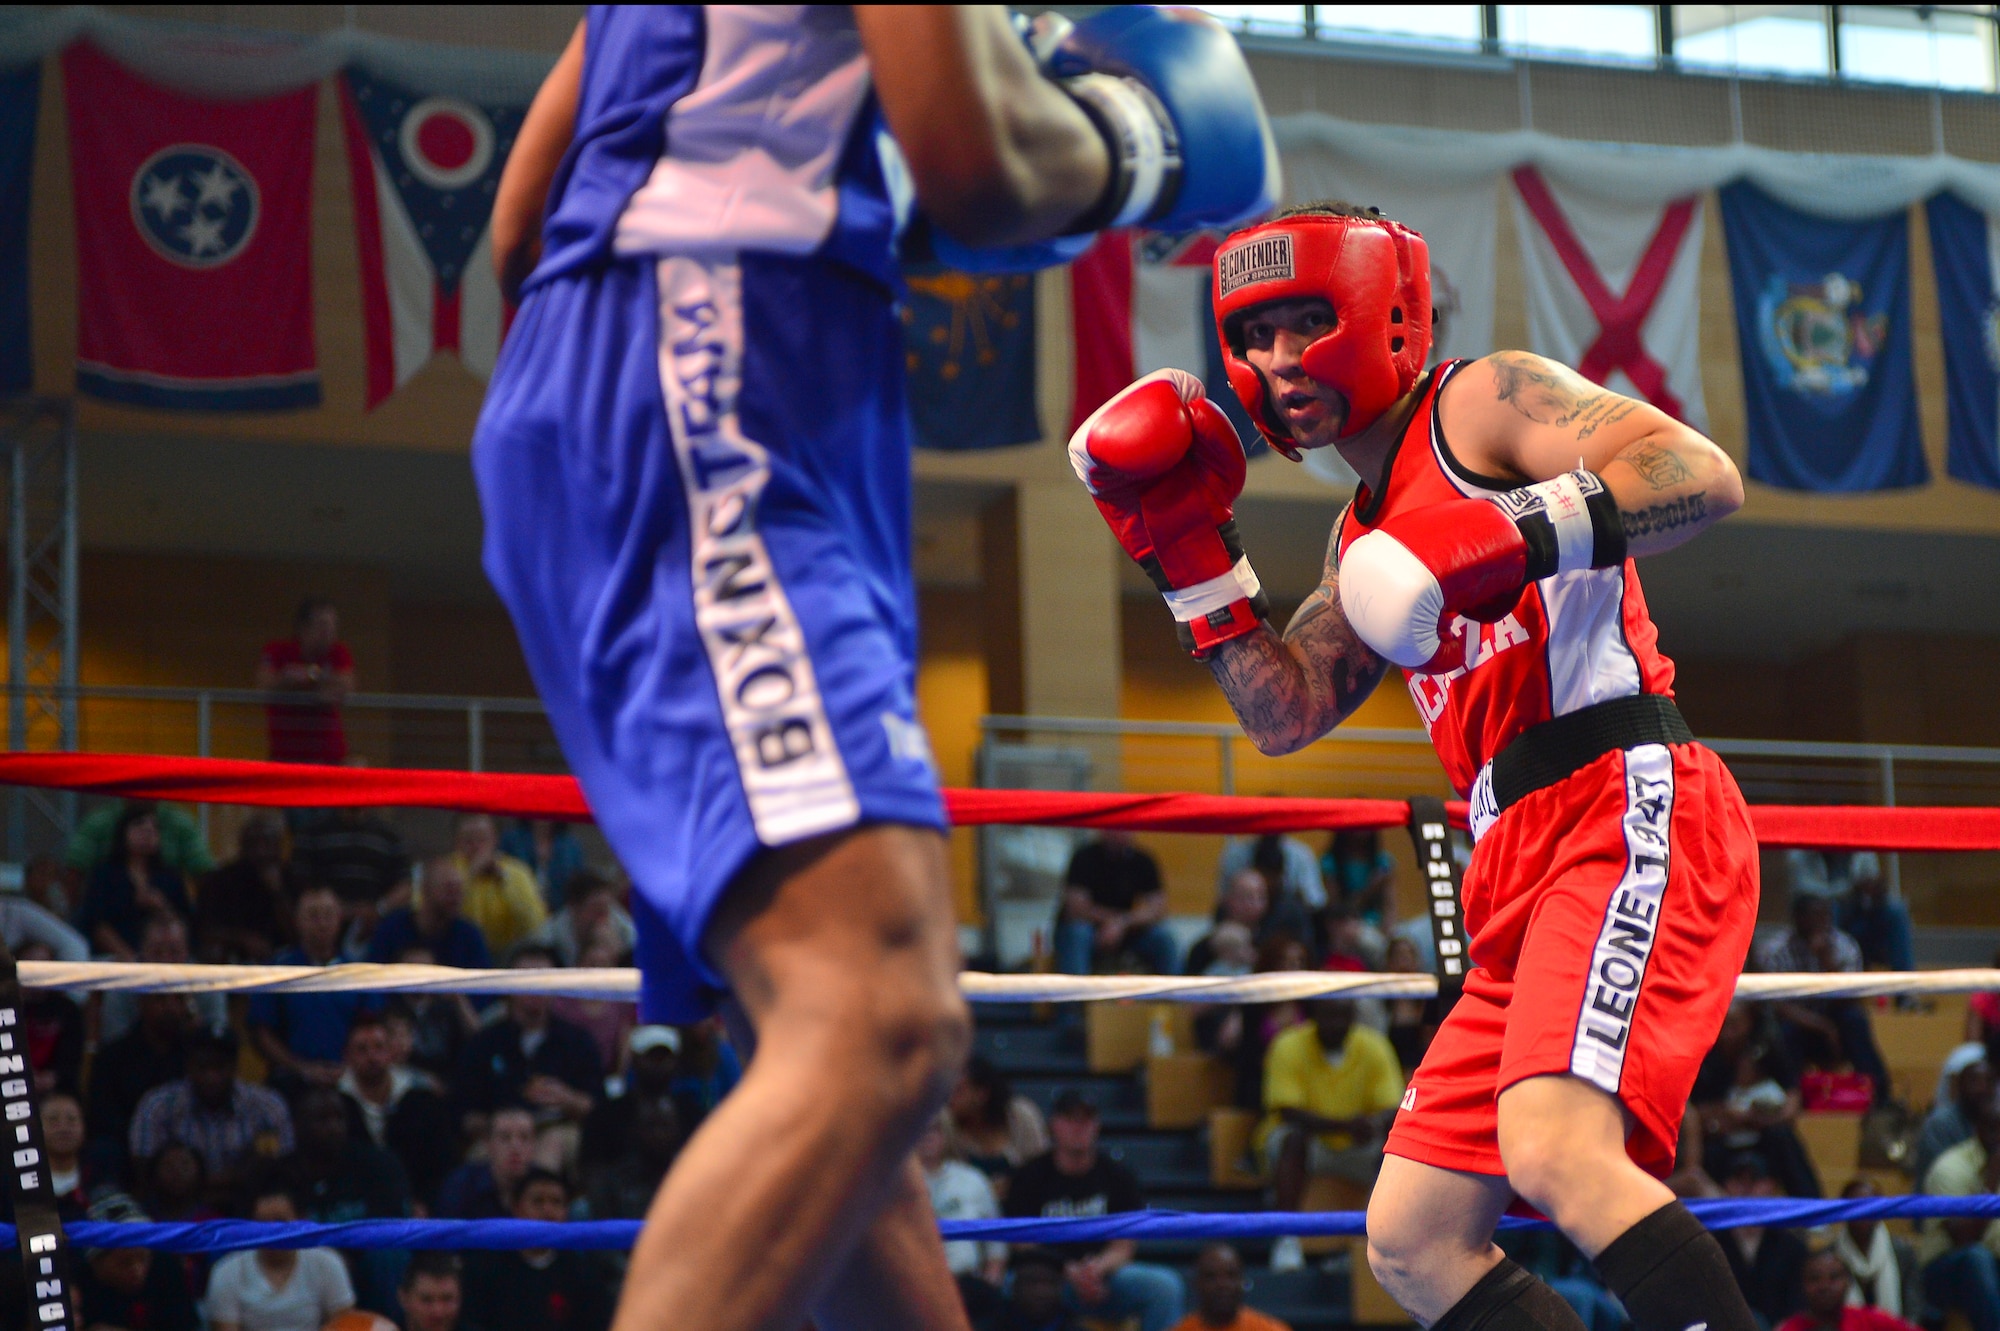 U.S. Forces top boxers brawl it out in Europe > Ramstein Air Base > Display